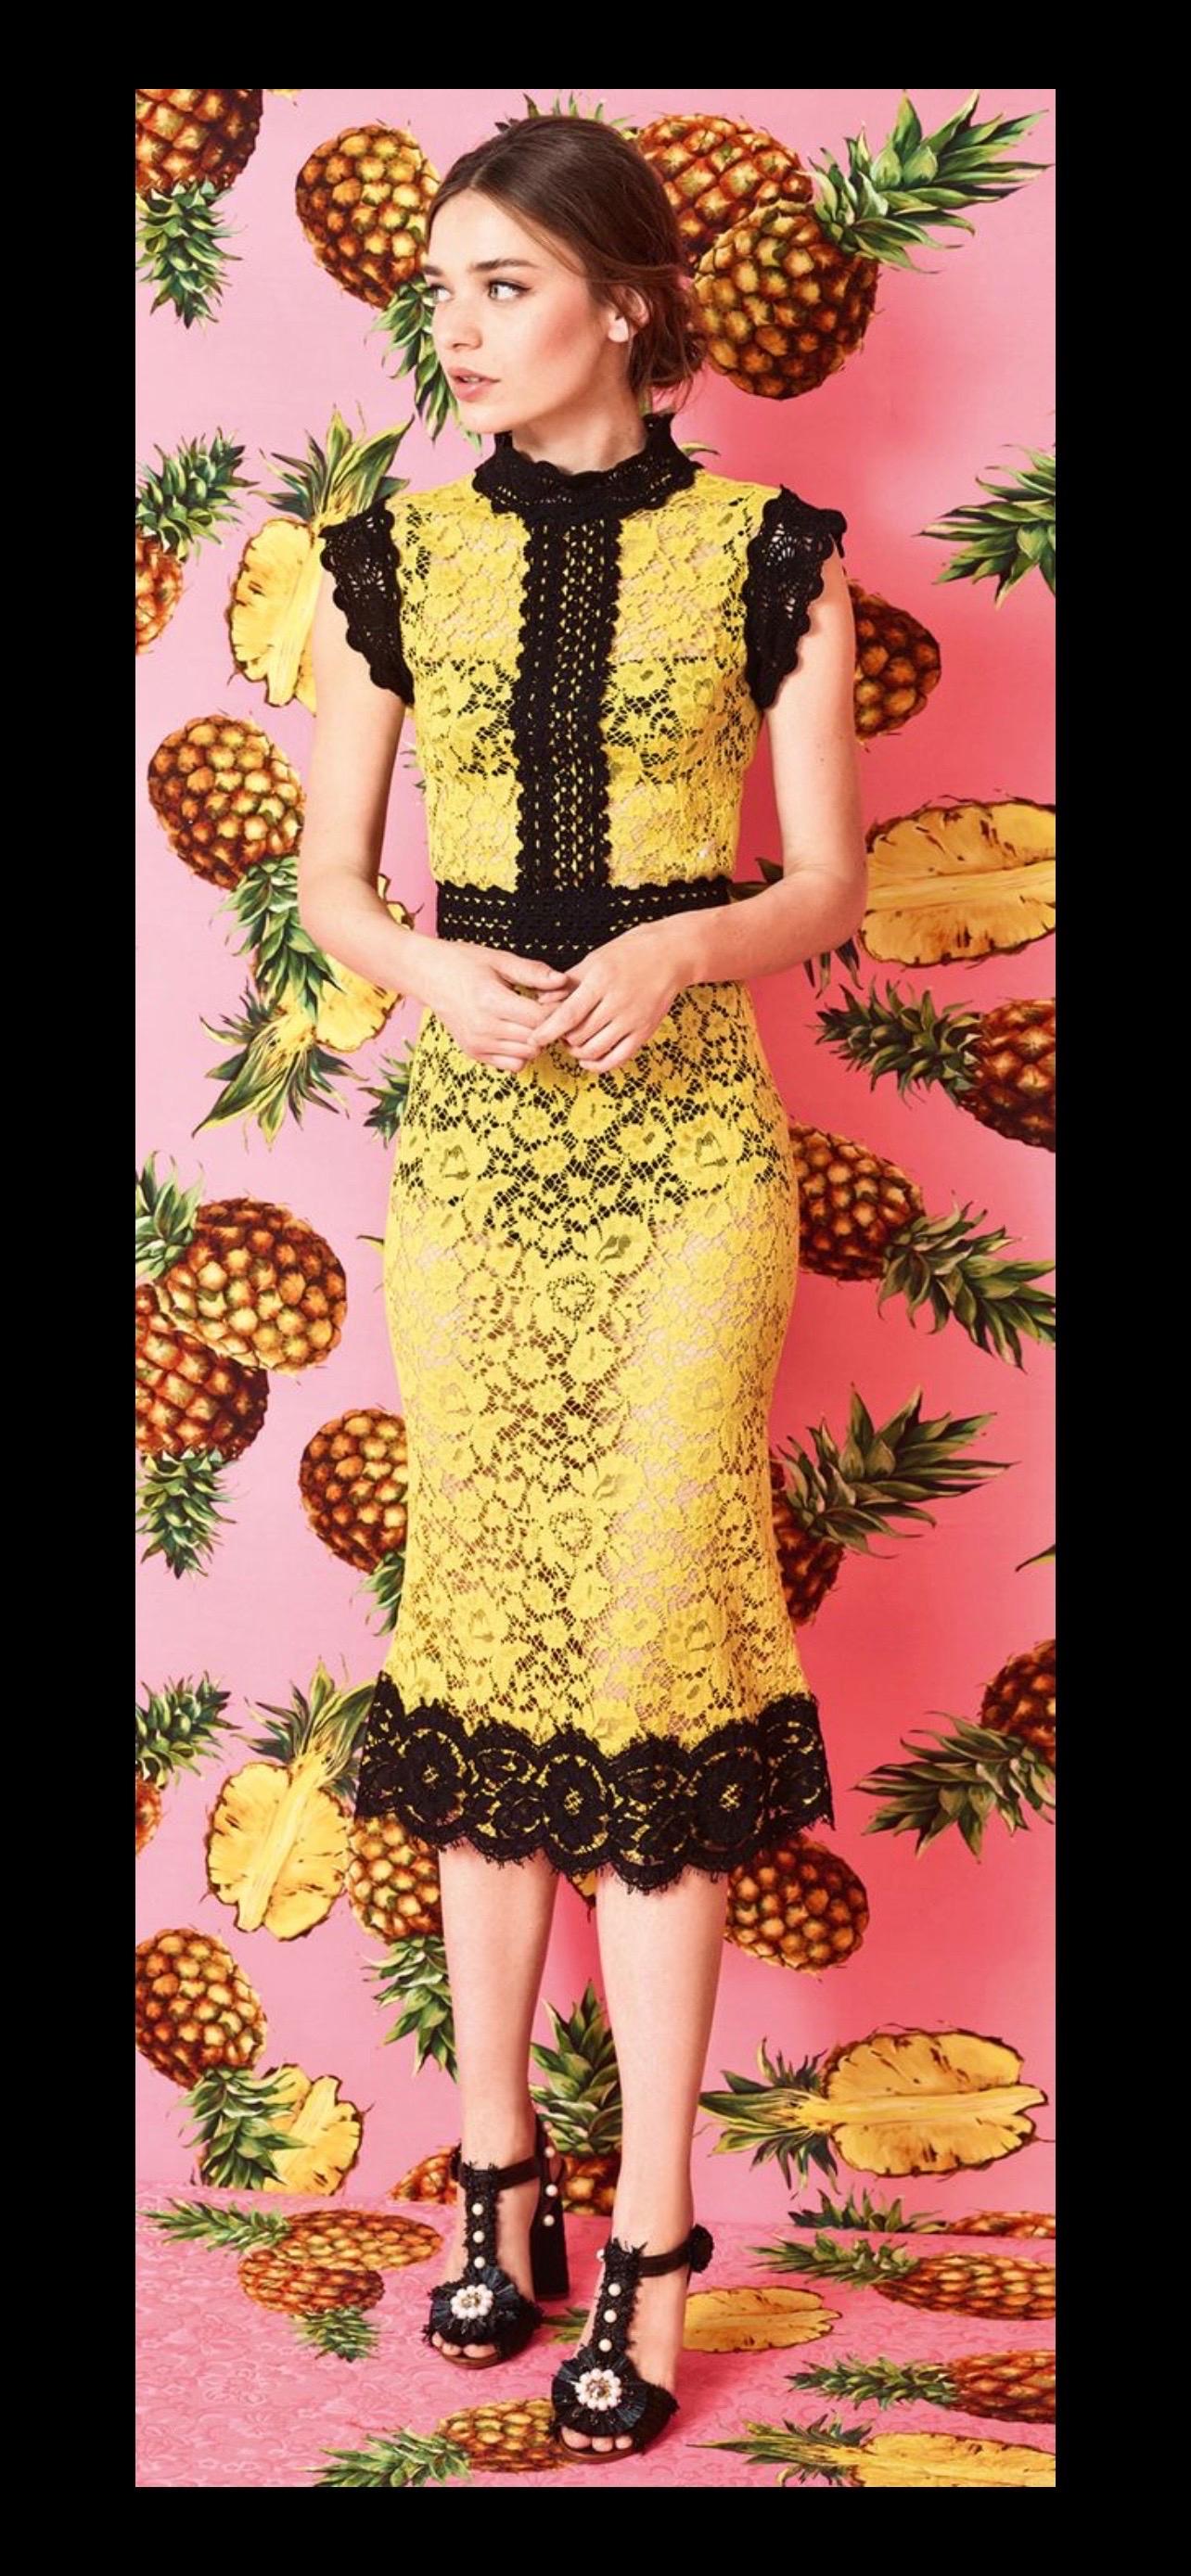 UNWORN Dolce & Gabbana Yellow & Black Guipure Lace Evening Cocktail Dress 40 For Sale 7